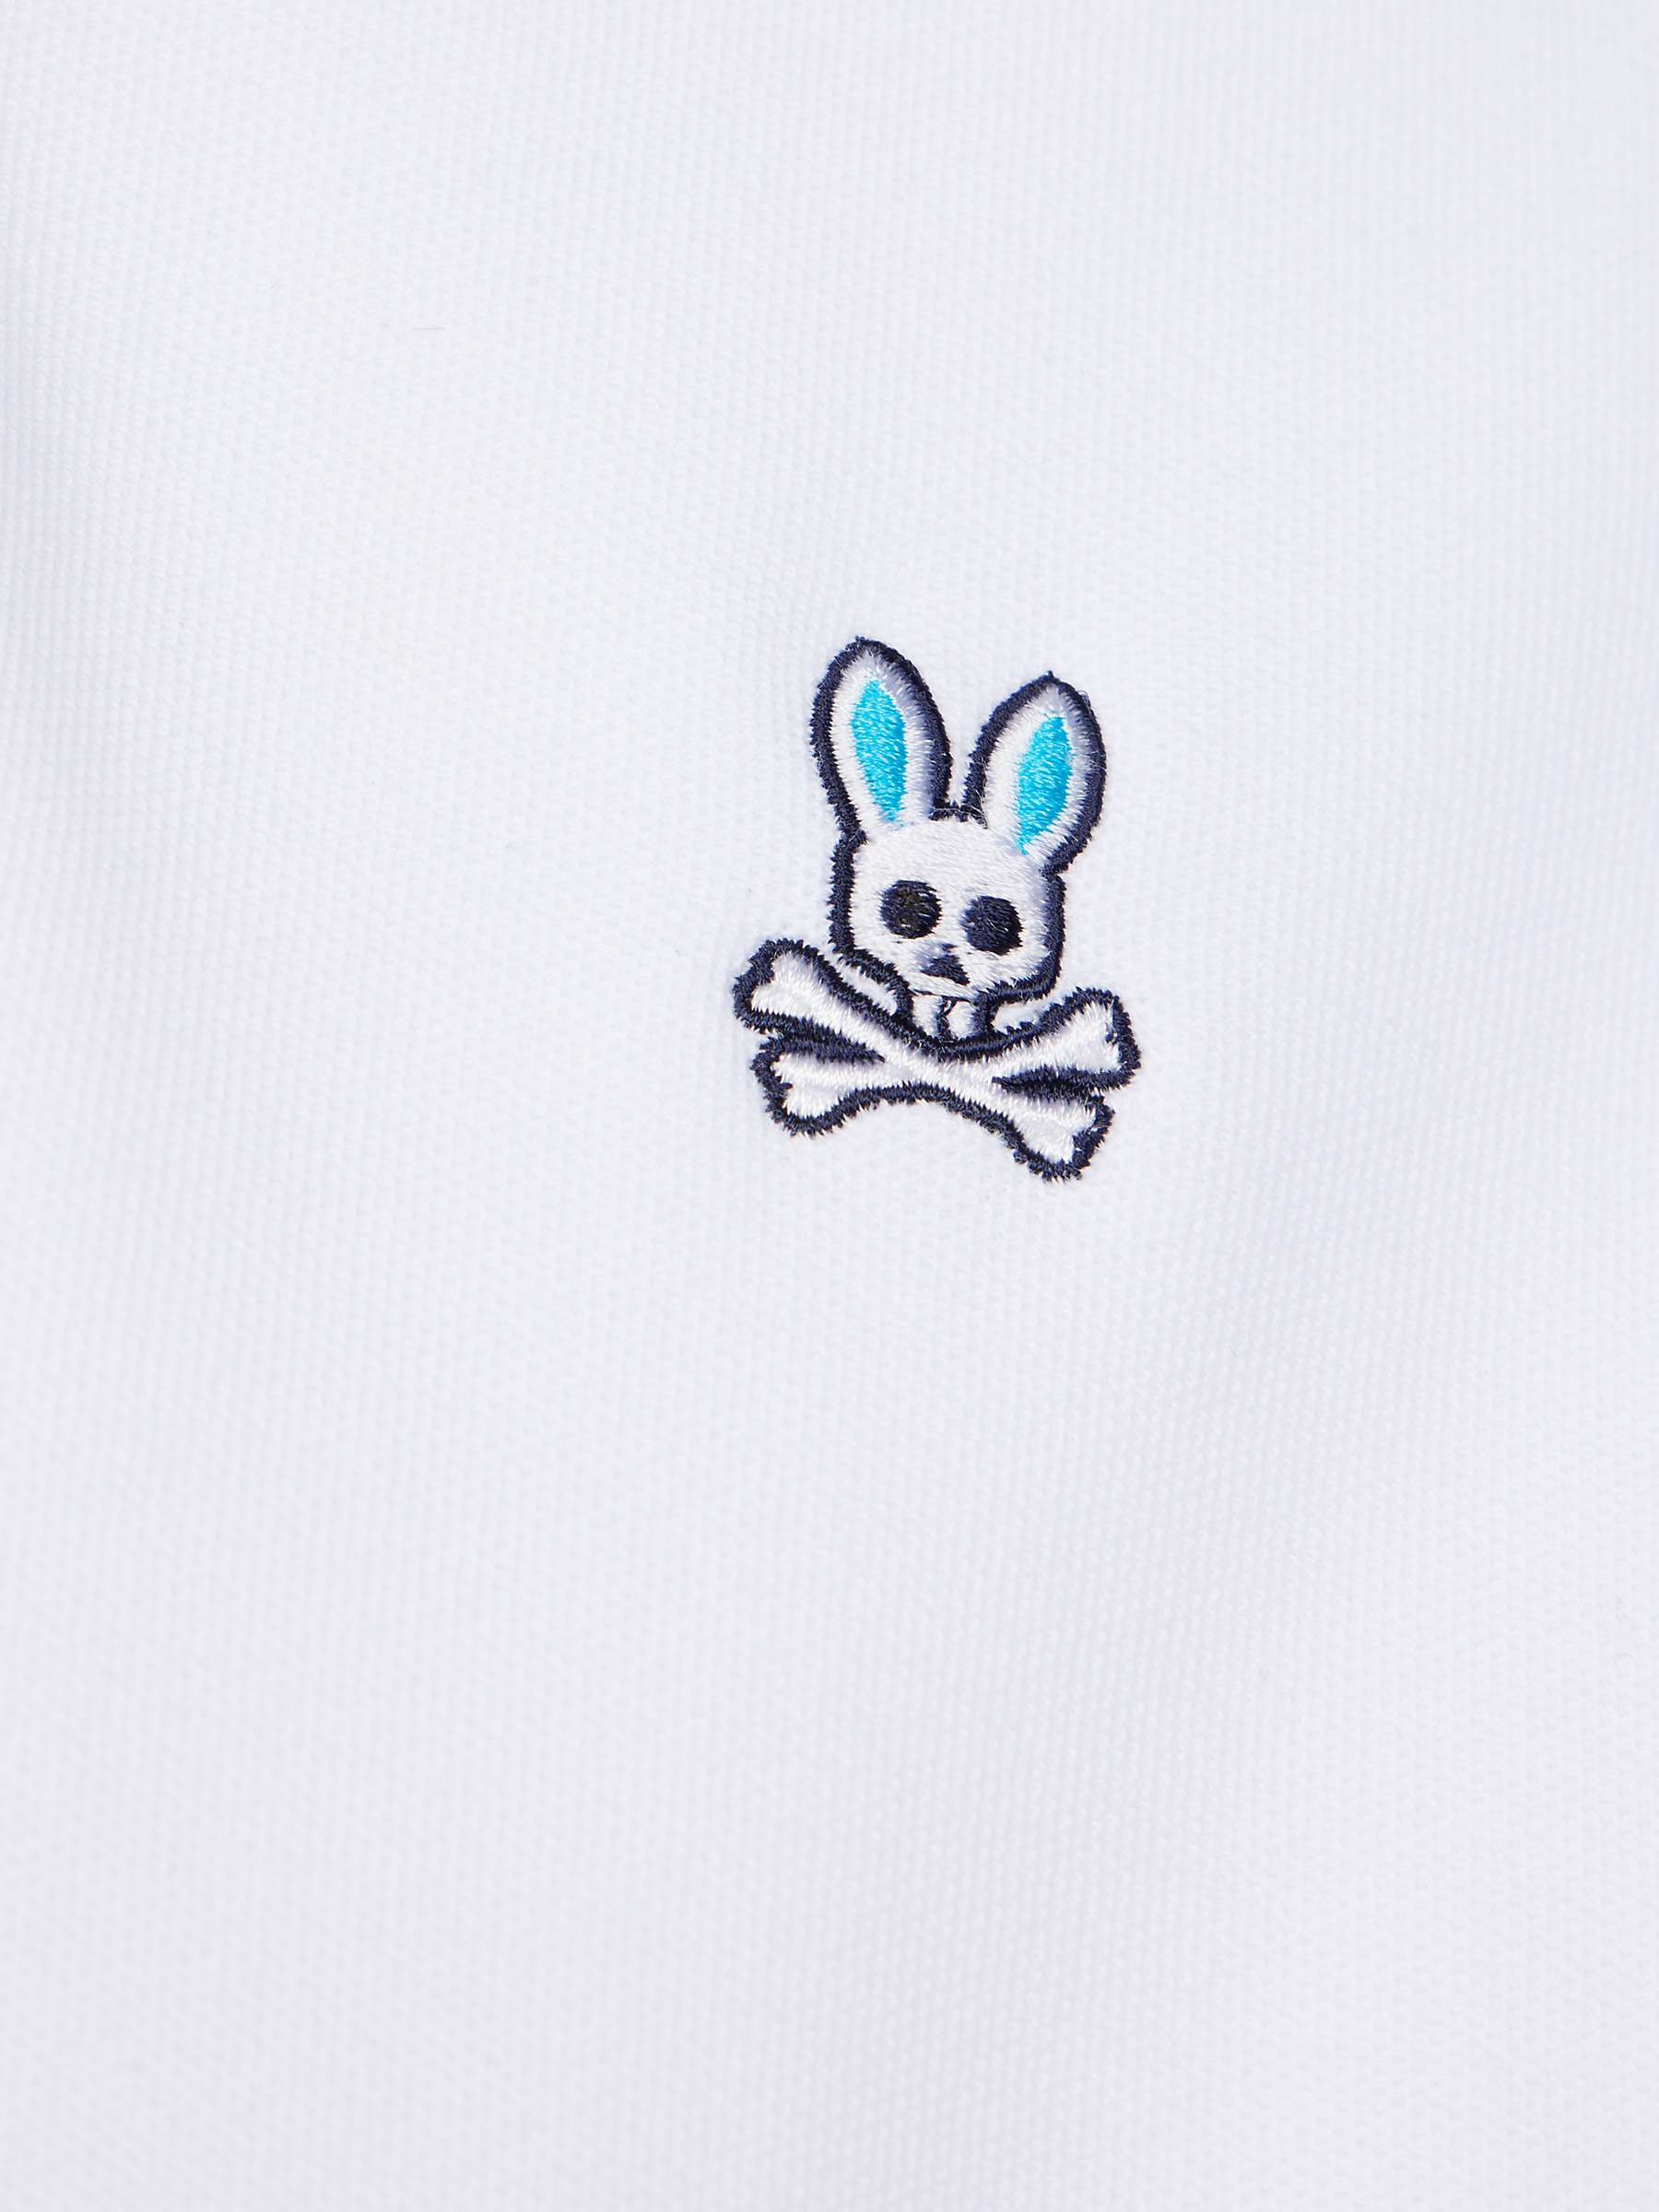 Buy Psycho Bunny Troy Pique Polo Shirt Online at johnlewis.com